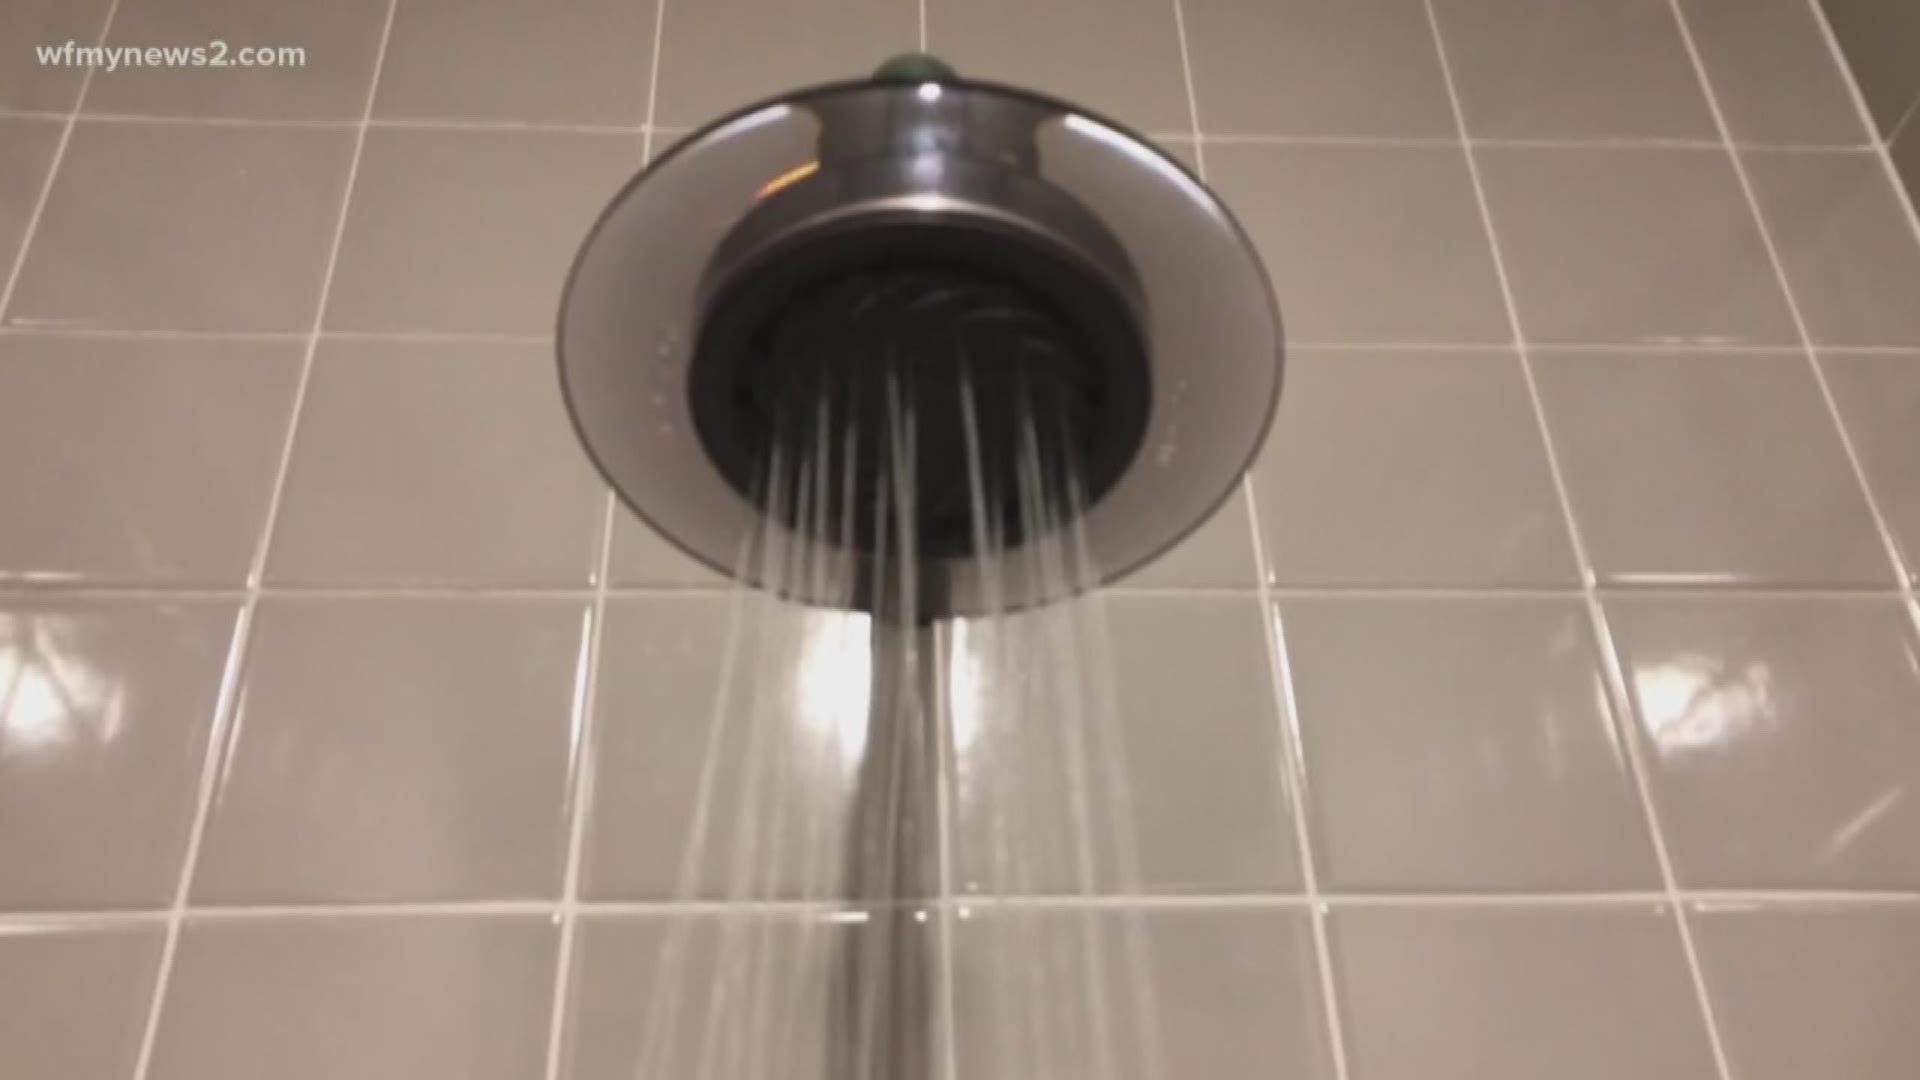 You can save some serious money on your water bill without cutting your showers short.